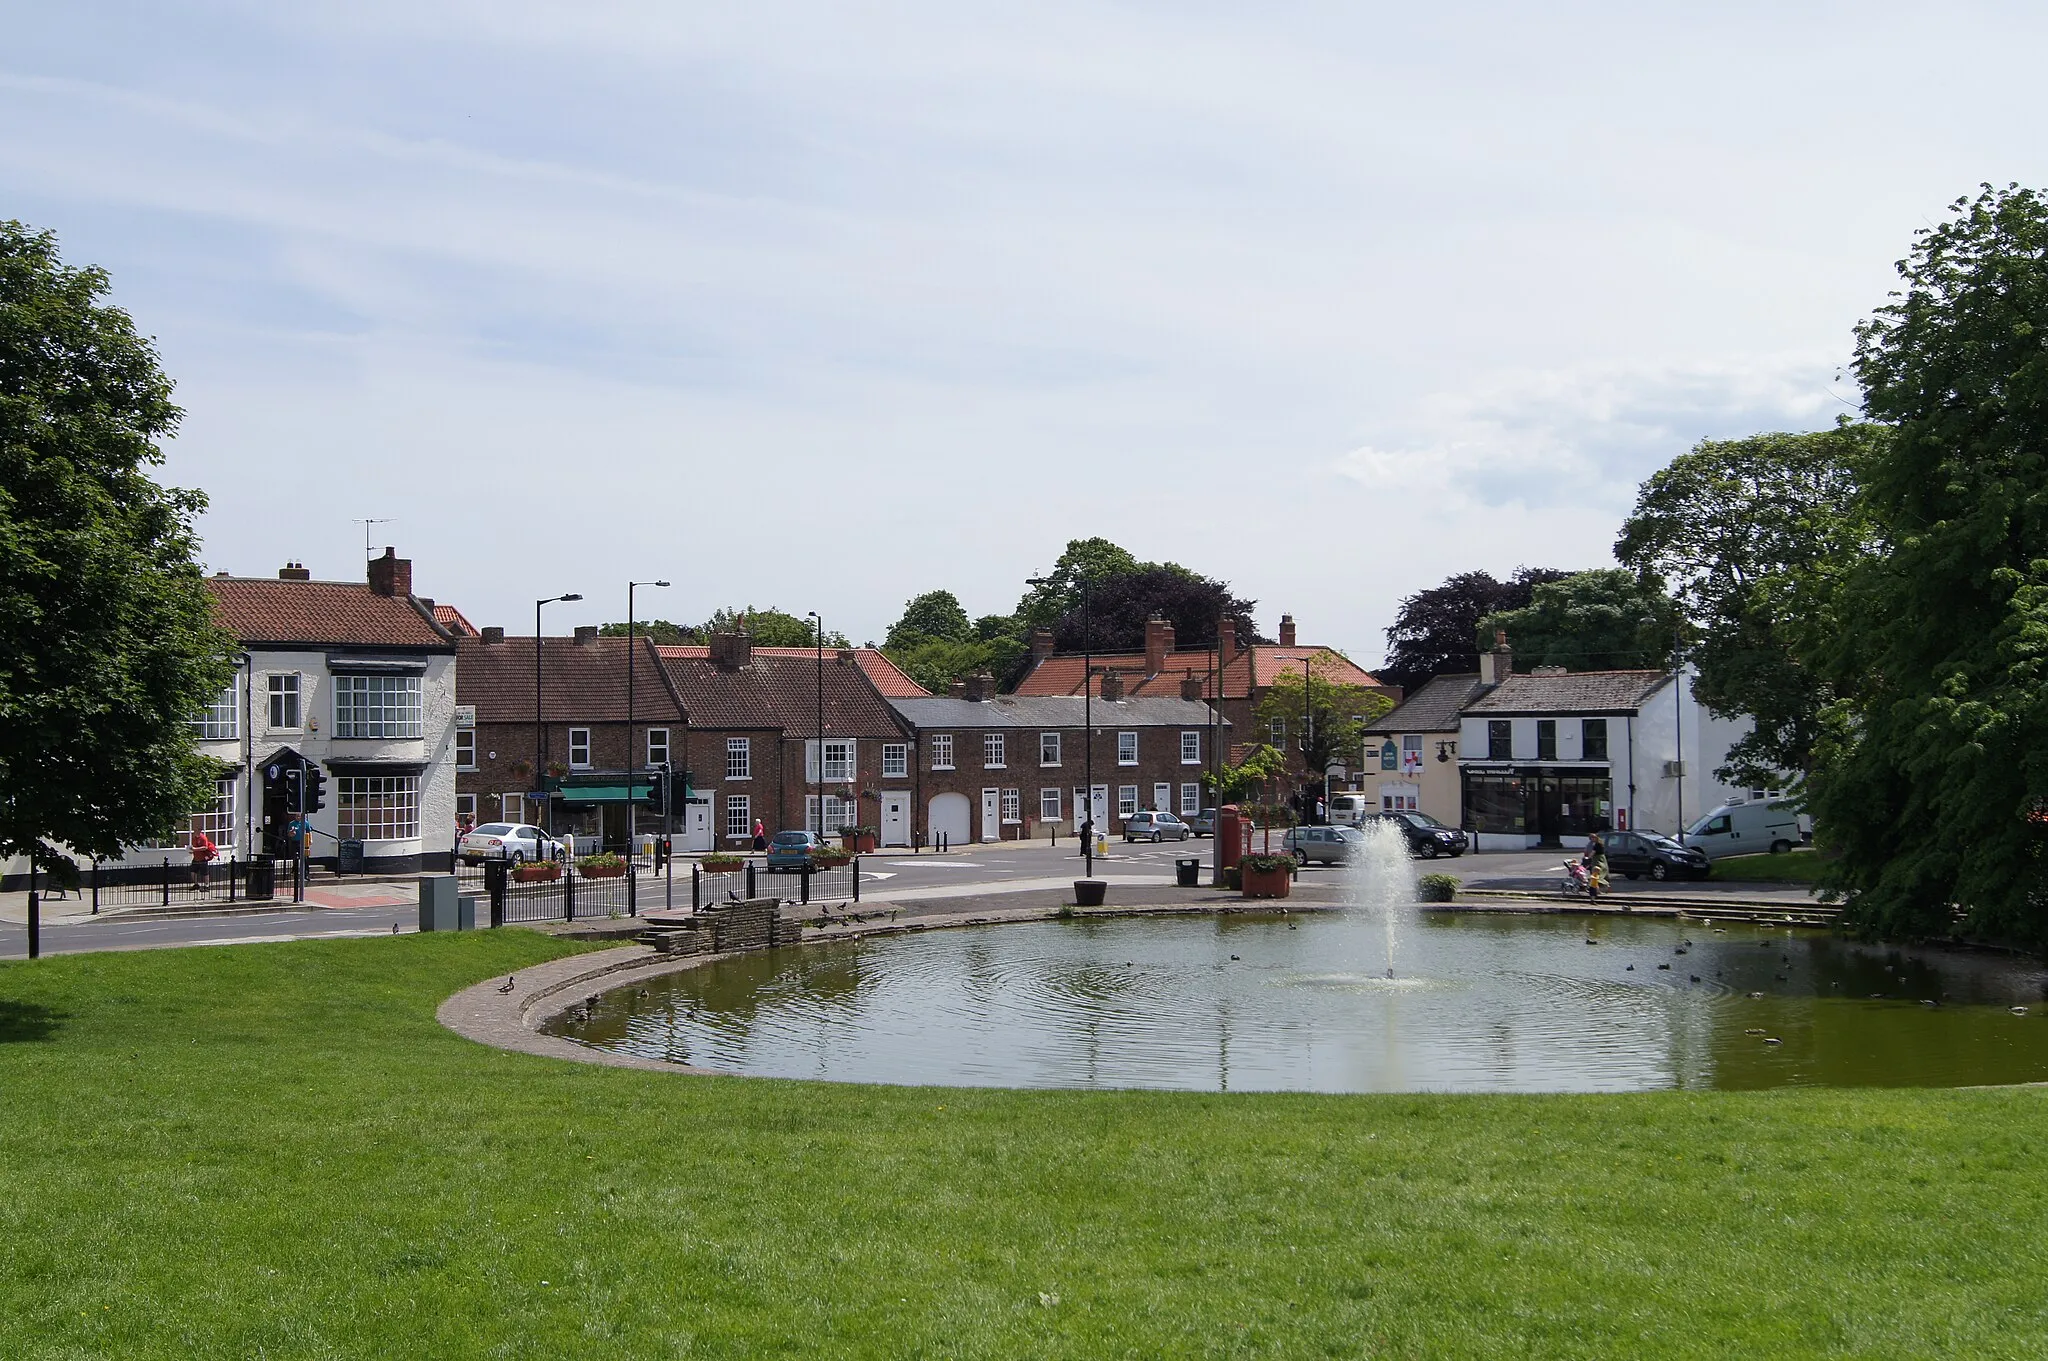 Photo showing: Norton Village Green with duckpond and fountain.
Picture taken in June 2012, facing south east towards the north end of the High Street. The Unicorn Pub can be seen behind the fountain. Building opposite the pedestrian crossing is the former blacksmiths forge, now a newsagent shop and cafe.